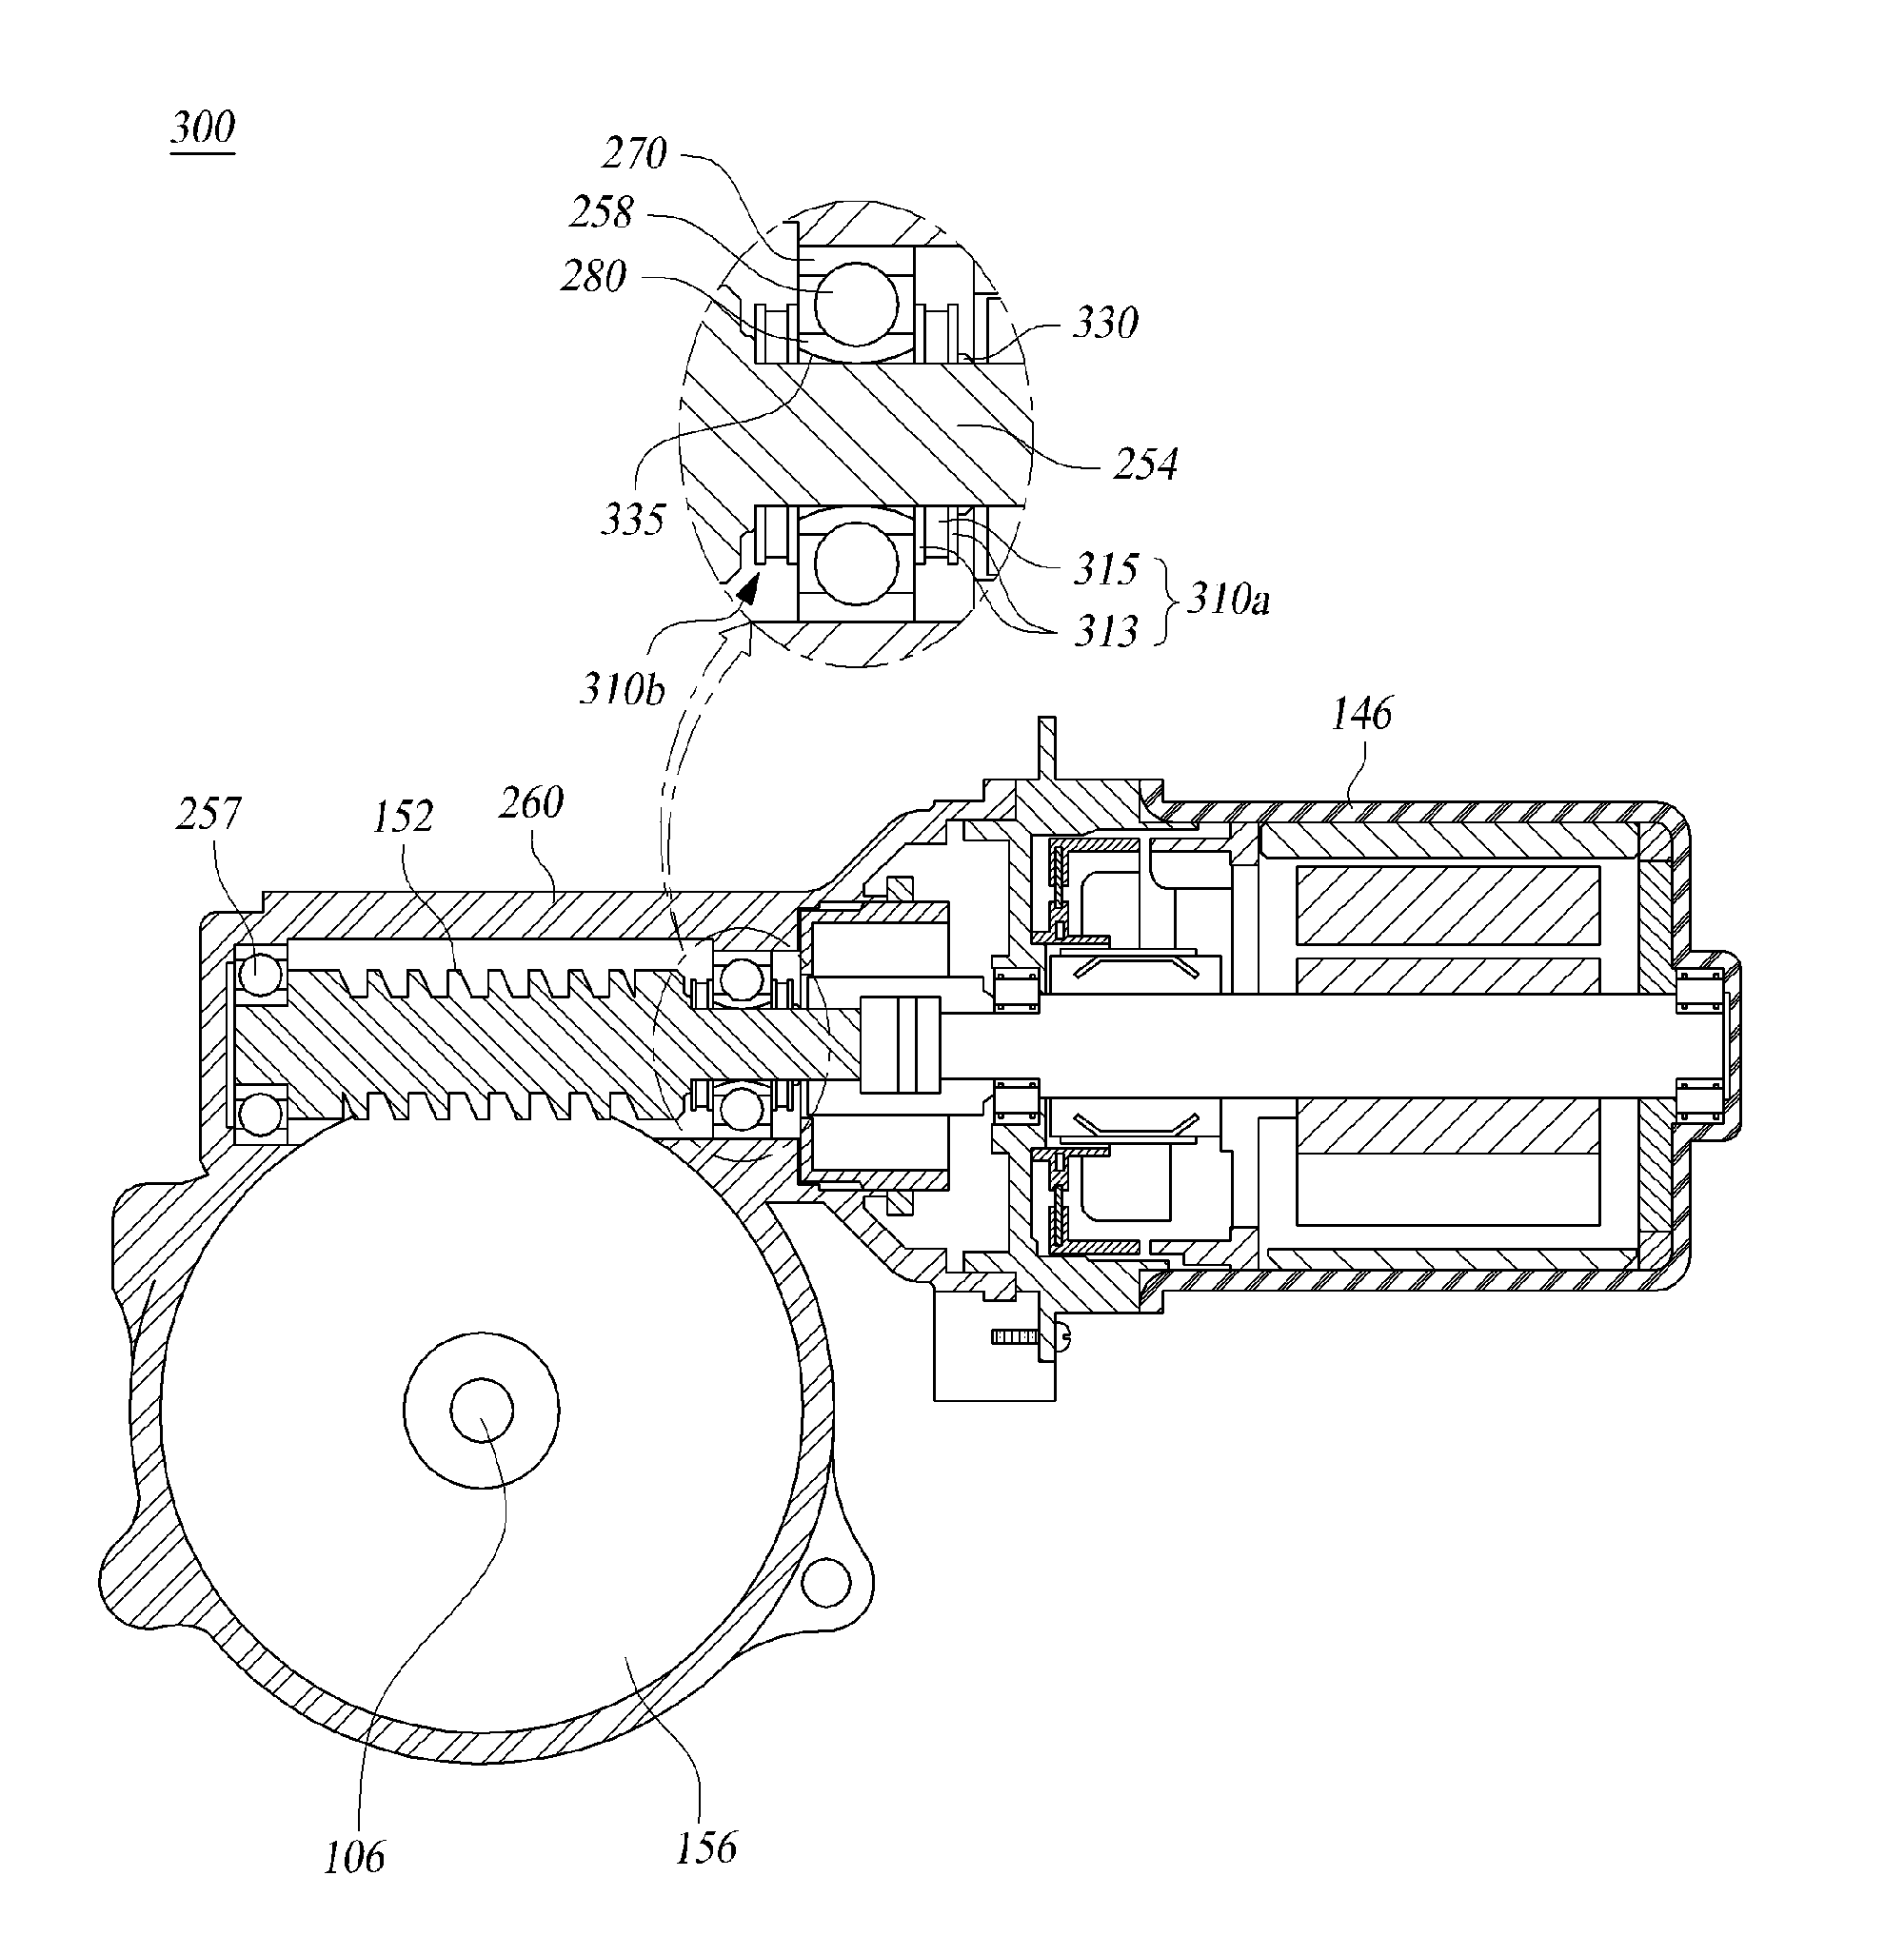 Reducer of electric power steering apparatus